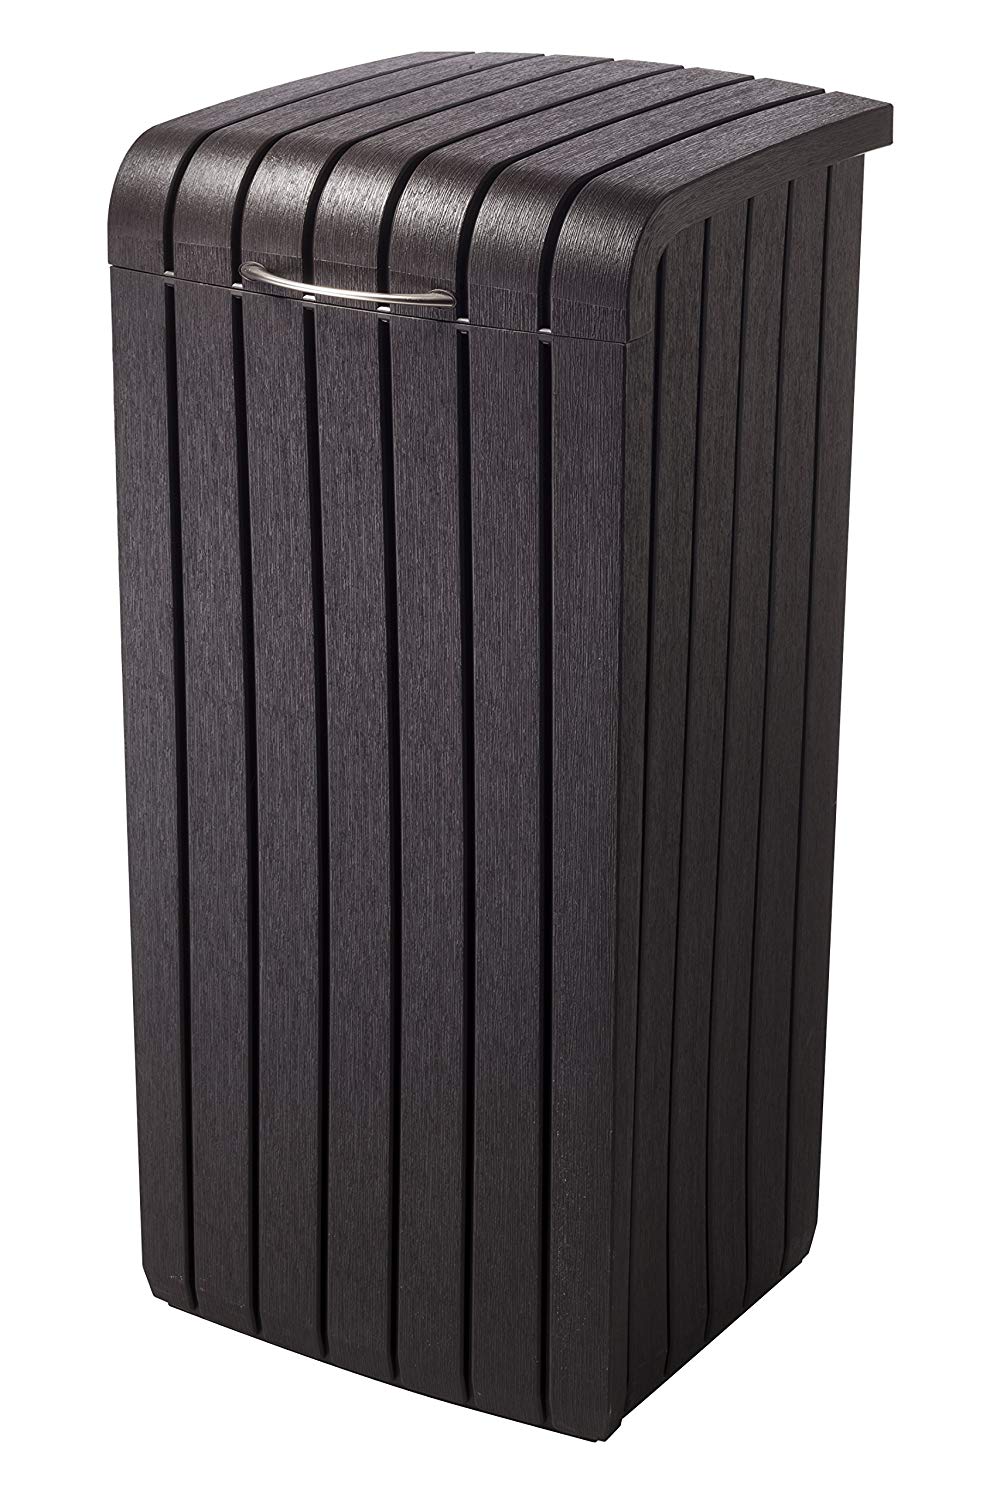 The Best Outdoor Trash Can October 2021, Best Outdoor Patio Trash Cans